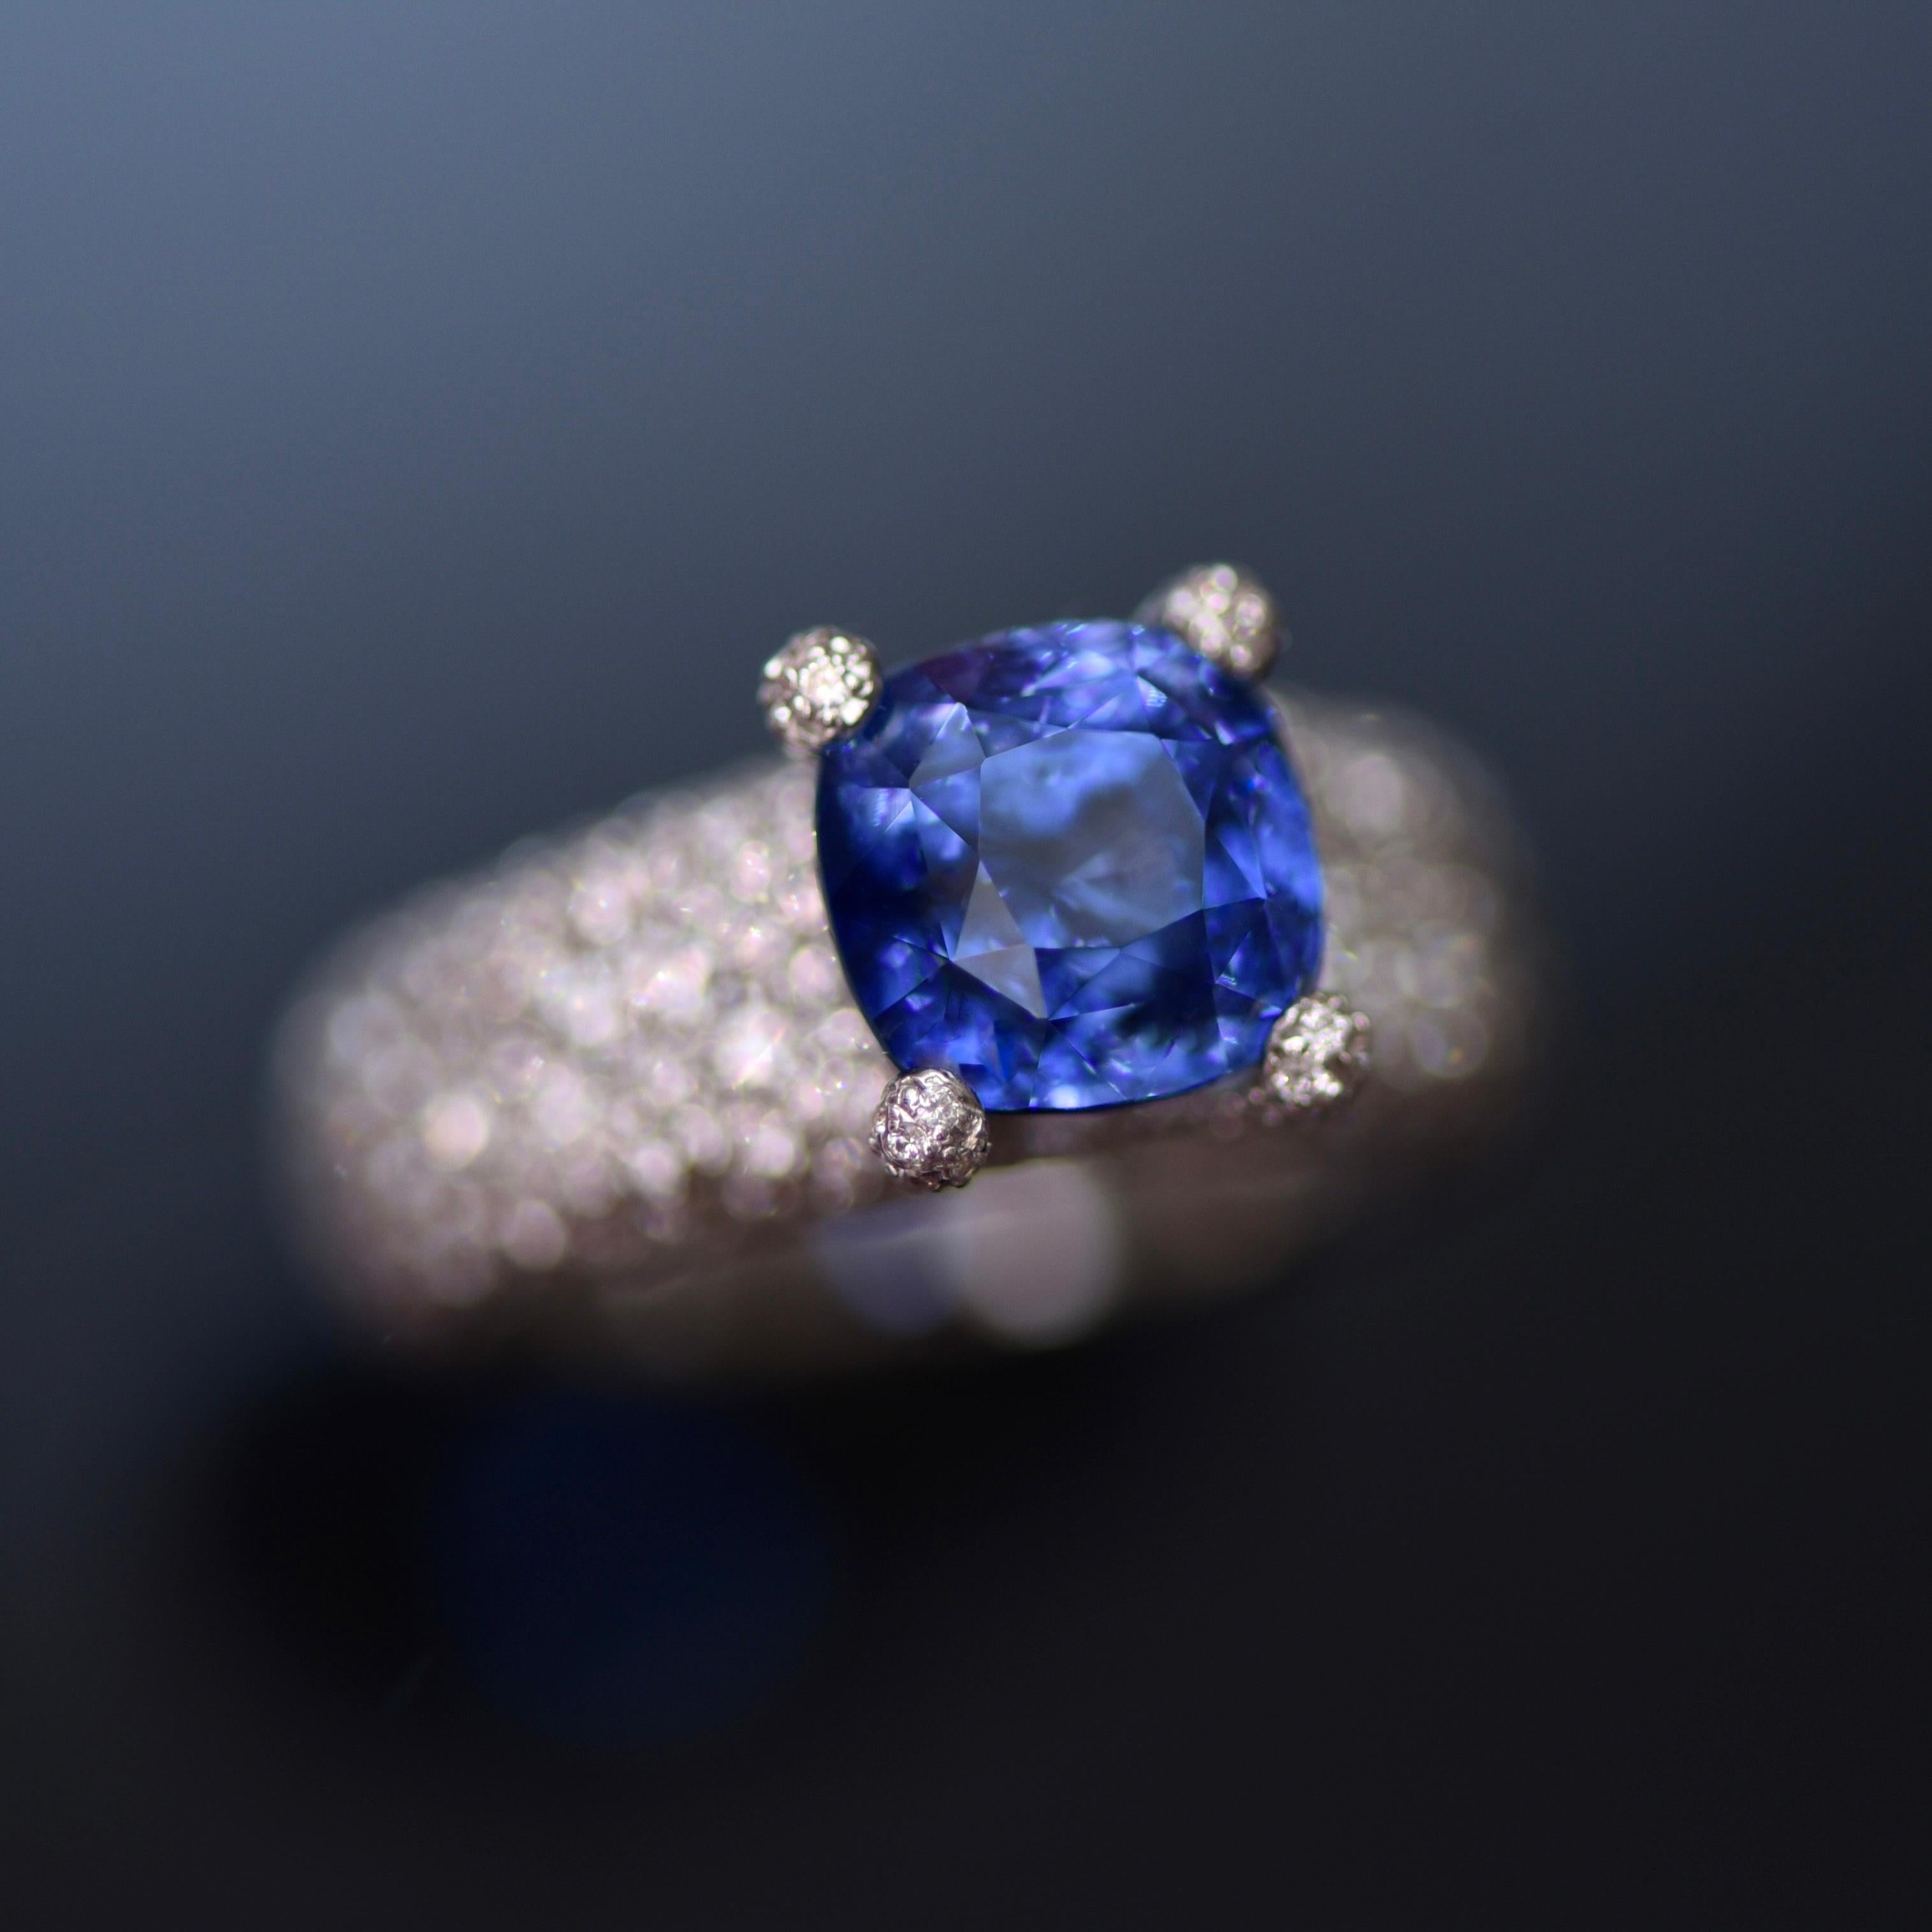 Cushion Cut 5.08 Carat Natural Sapphire Diamonds 18 Karat White Gold Cocktail Ring by D&A For Sale